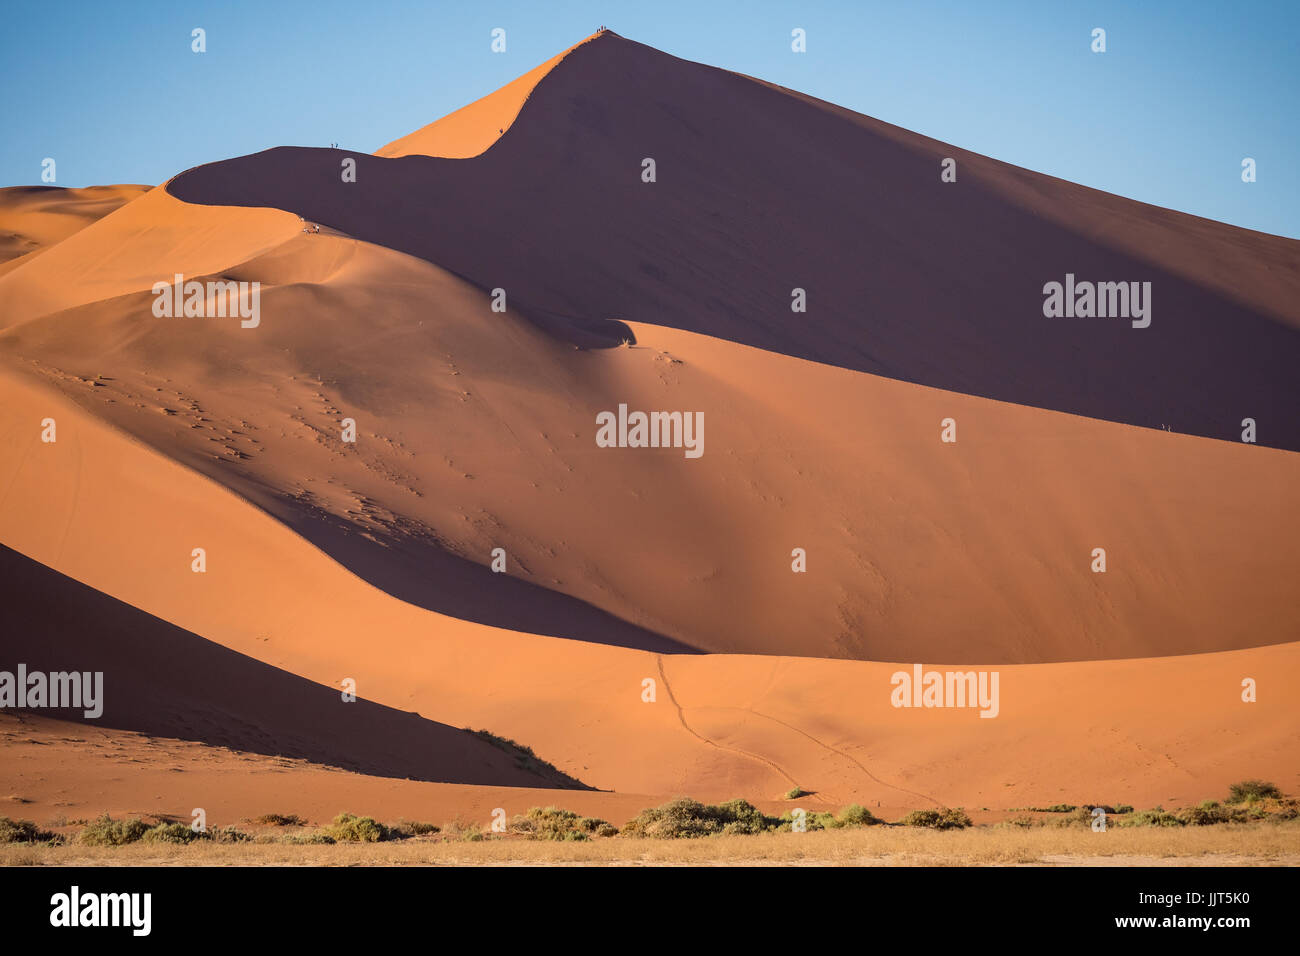 Namib-Naukluft National Park in Namibia, Africa, one of the world's oldest deserts. Contains some of the world's largest sand dunes, Sossusvlei. Stock Photo